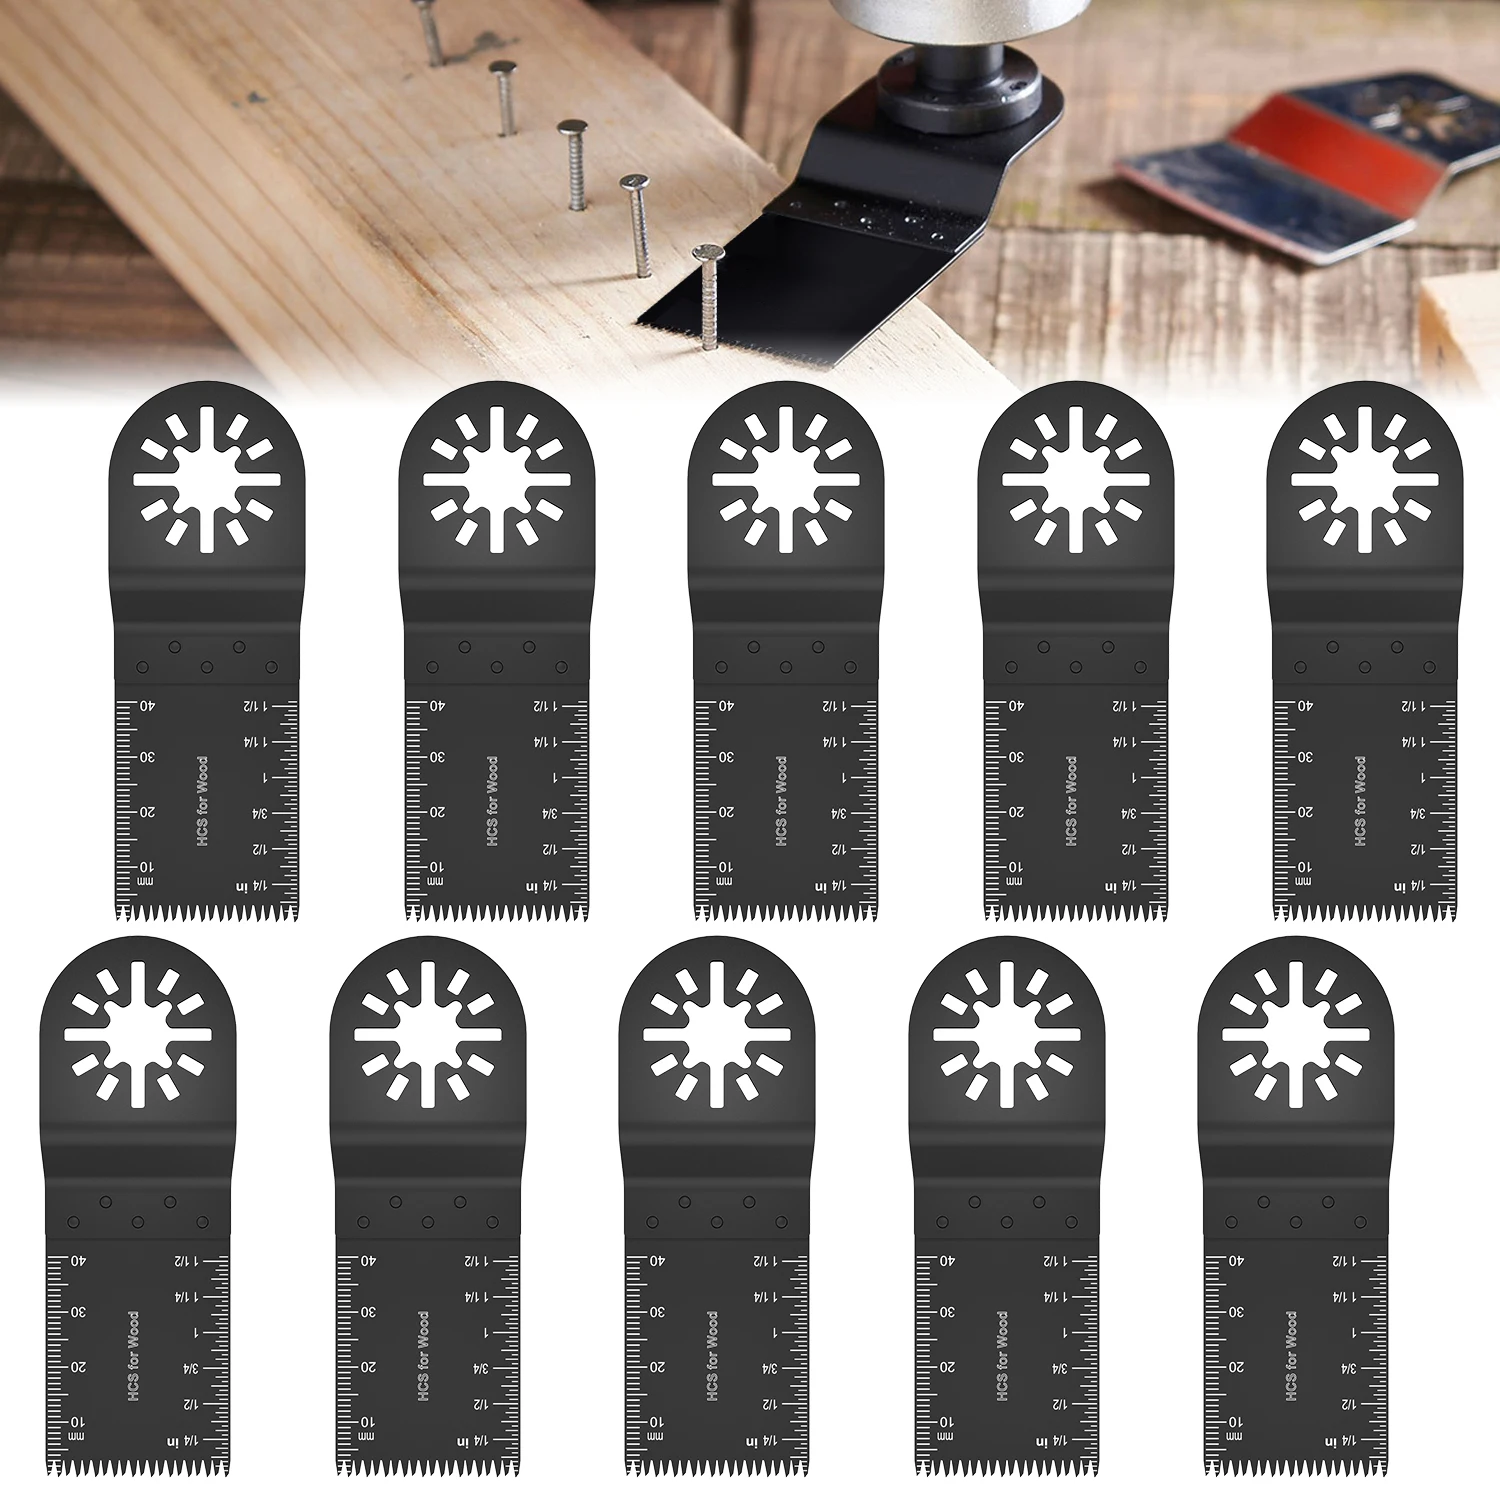 10pcs Oscillating Multitool Saw Blades Accessories for Renovator Power Tools As Fein Multimaster Dremel Wood Cutting Dics